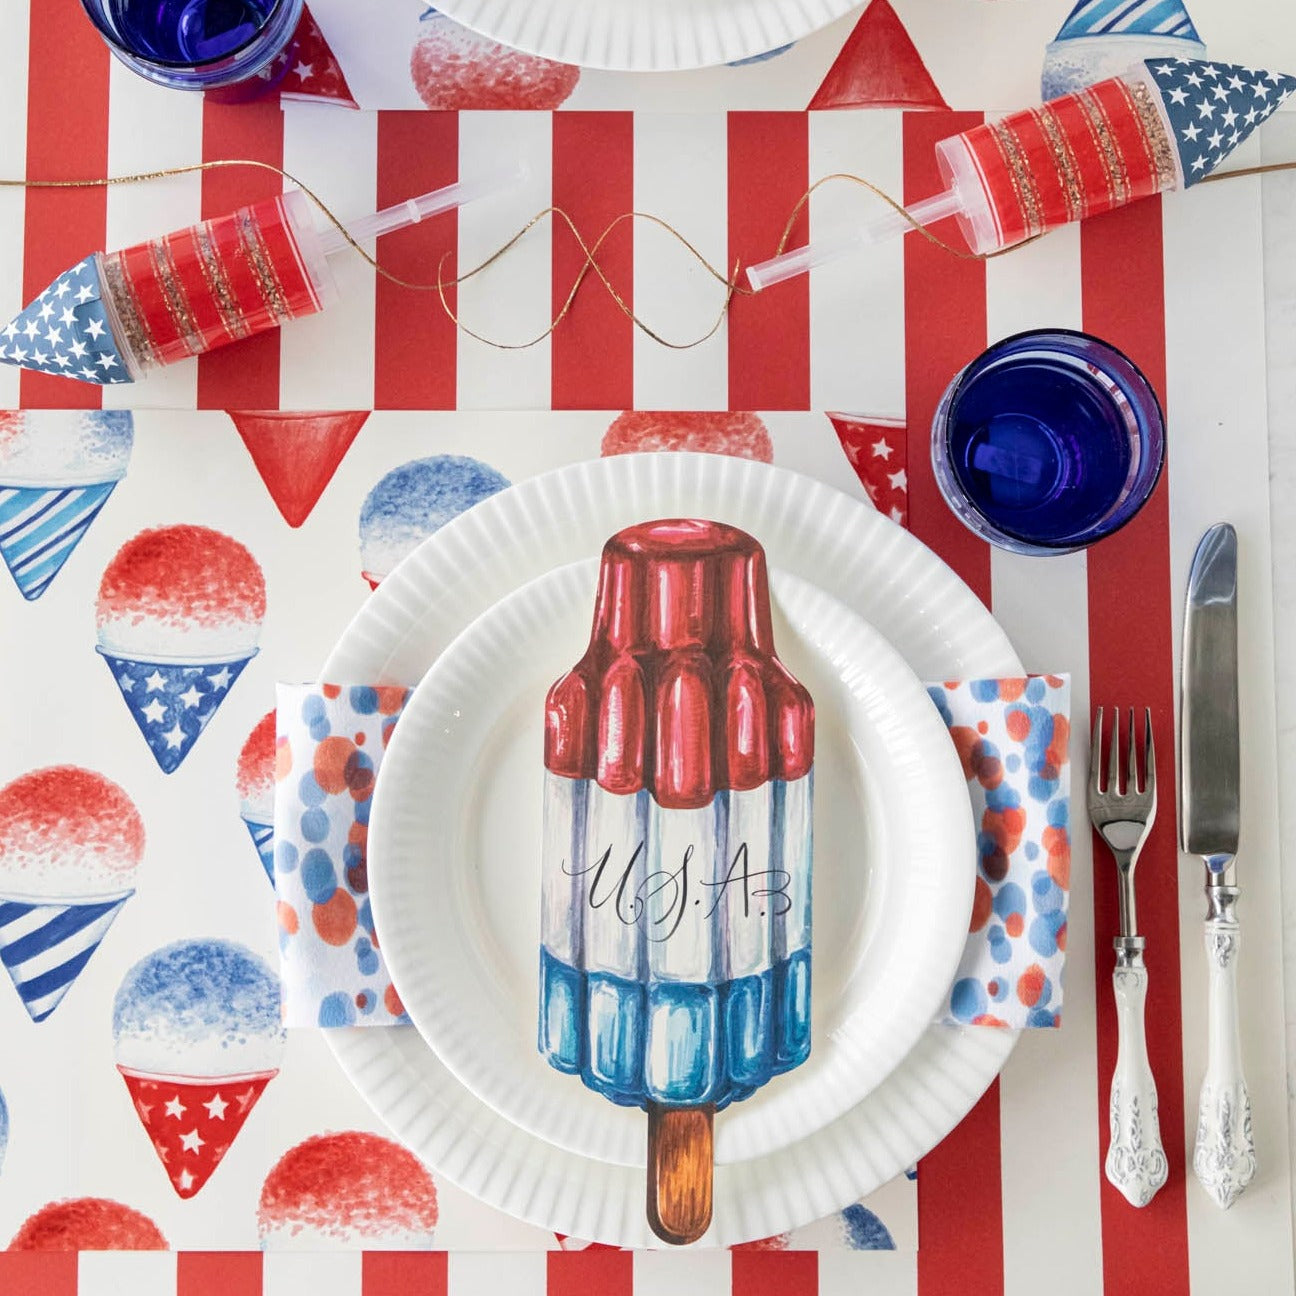 Celebrate the 4th of July with a patriotic table setting featuring a Snow Cone Placemat adorned with red, white, and blue toppings. Complete the summer-themed ambiance with a USA flag.